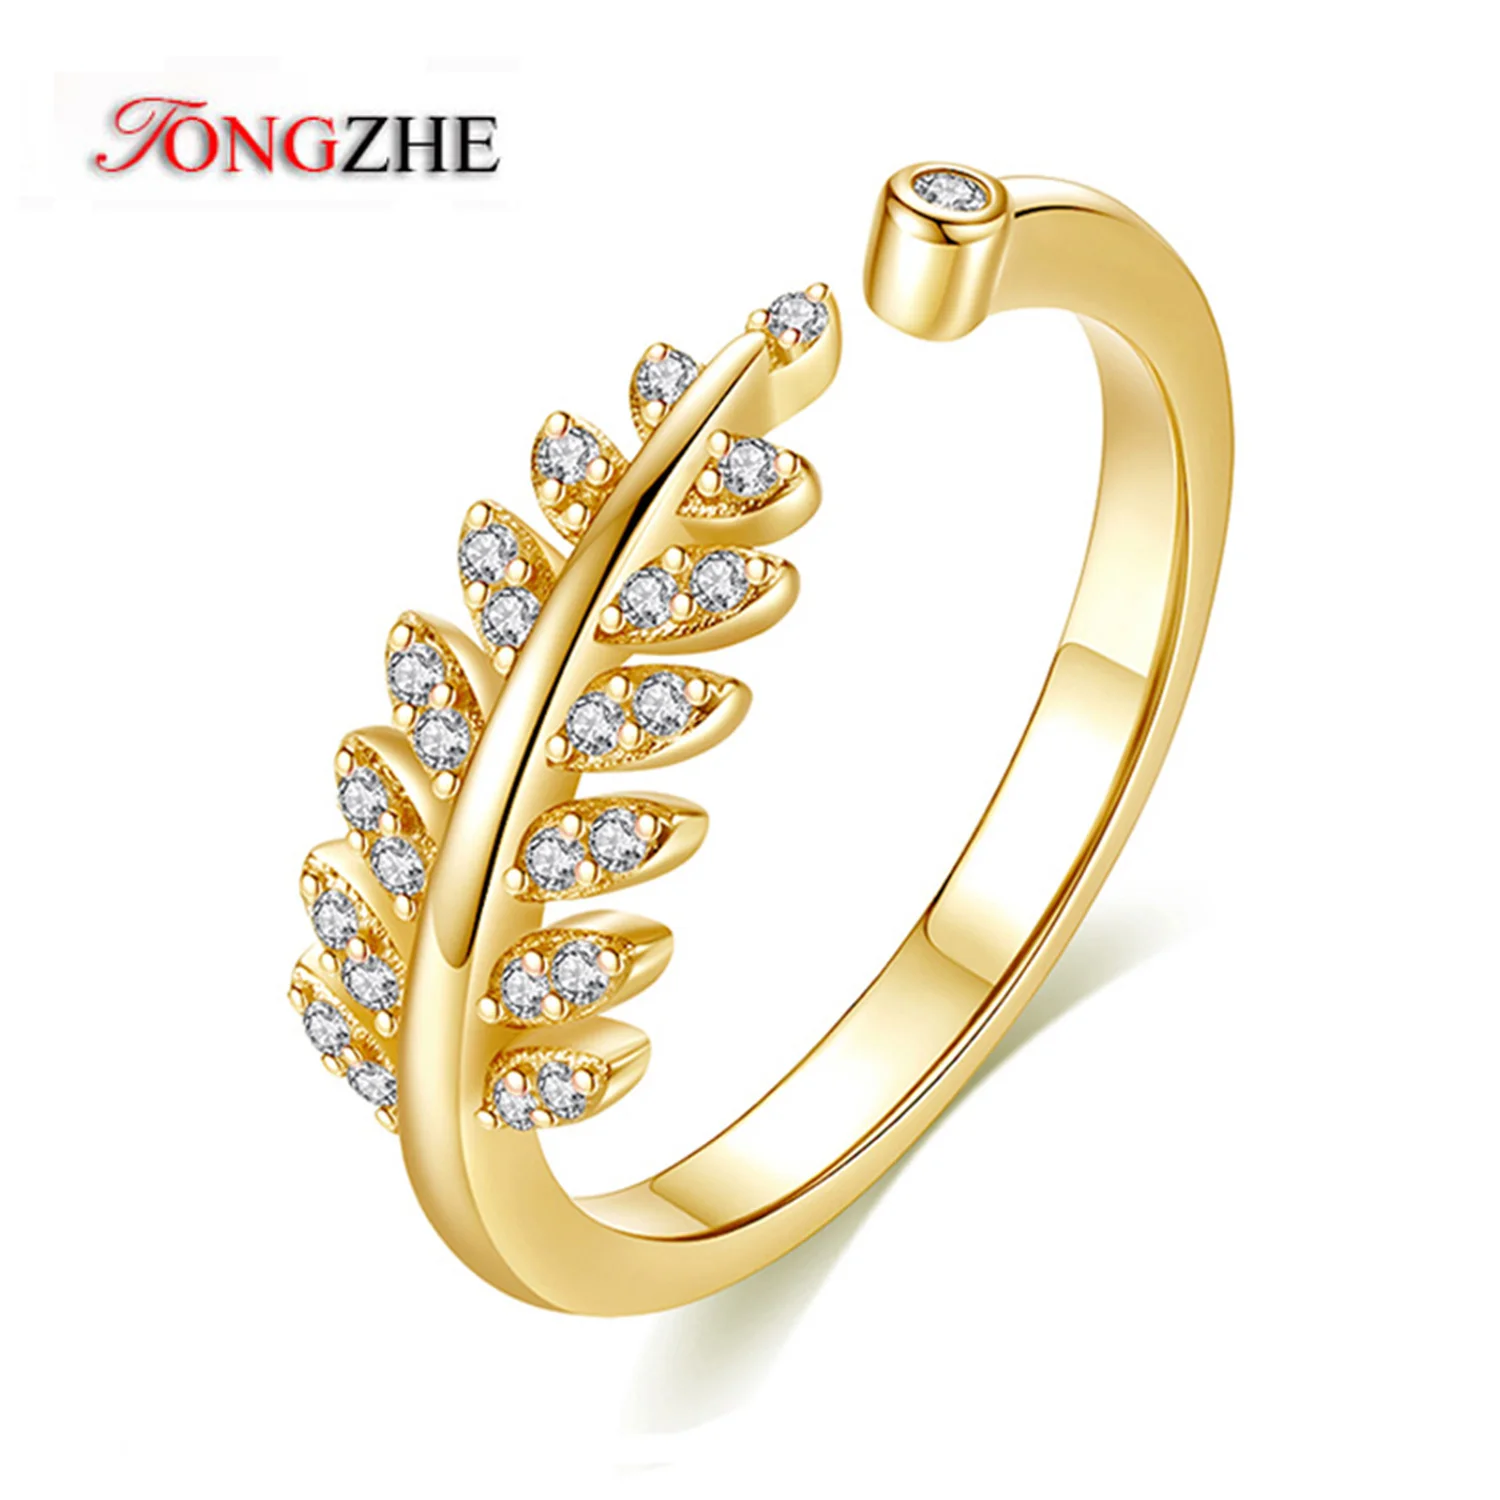 

TONGZHE 925 Sterling Silver Leaves Open Rings For Women Unique Lightning CZ Shiny Crystal Ring Adjustable Size Fine Jewelry